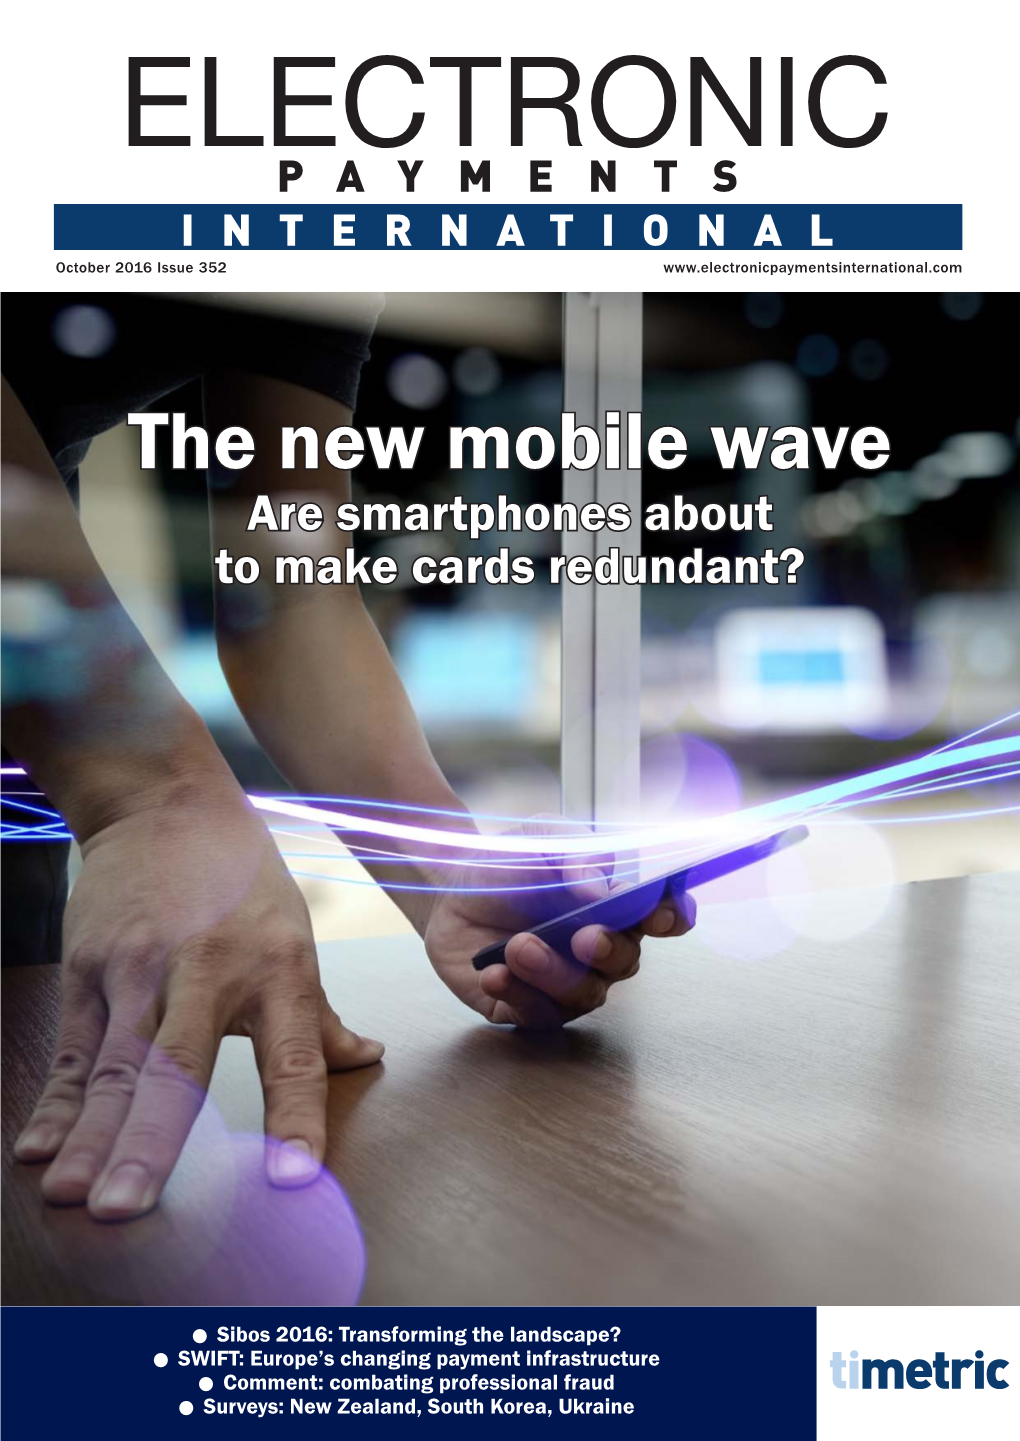 The New Mobile Wave Are Smartphones About to Make Cards Redundant?